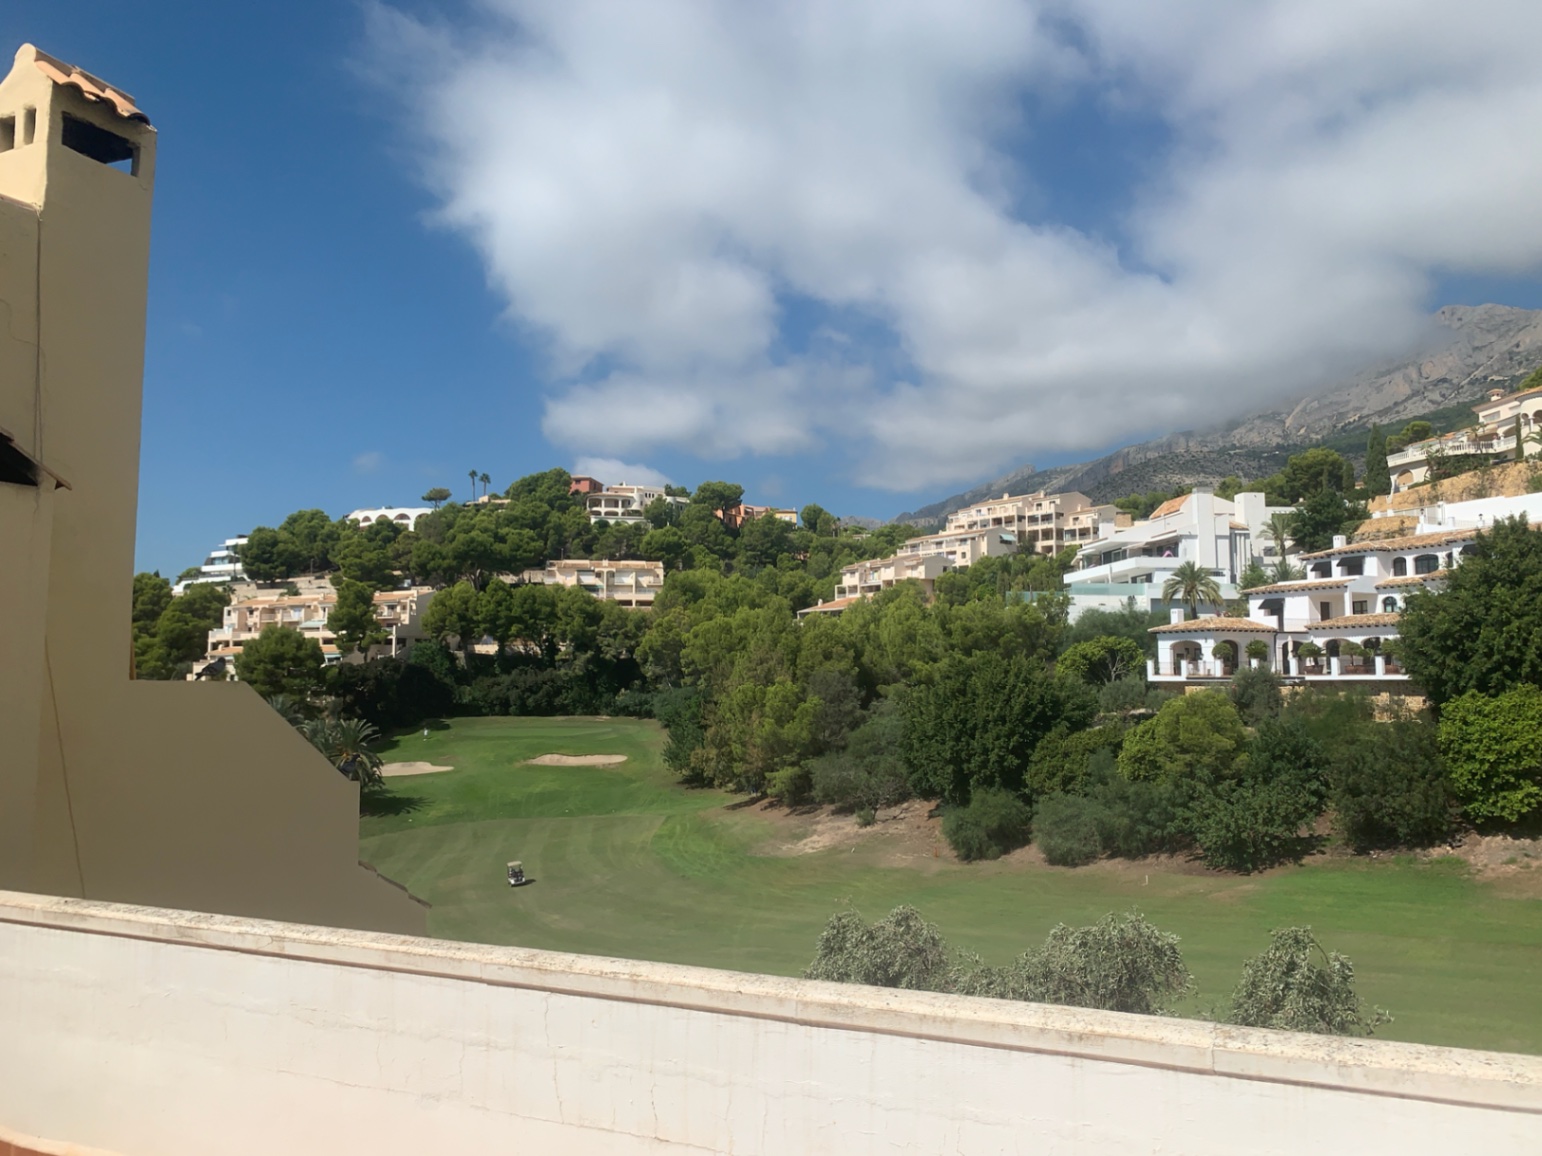 Splendid Villa on the Altea Golf Course: Luxury and Style in an Exceptional Location